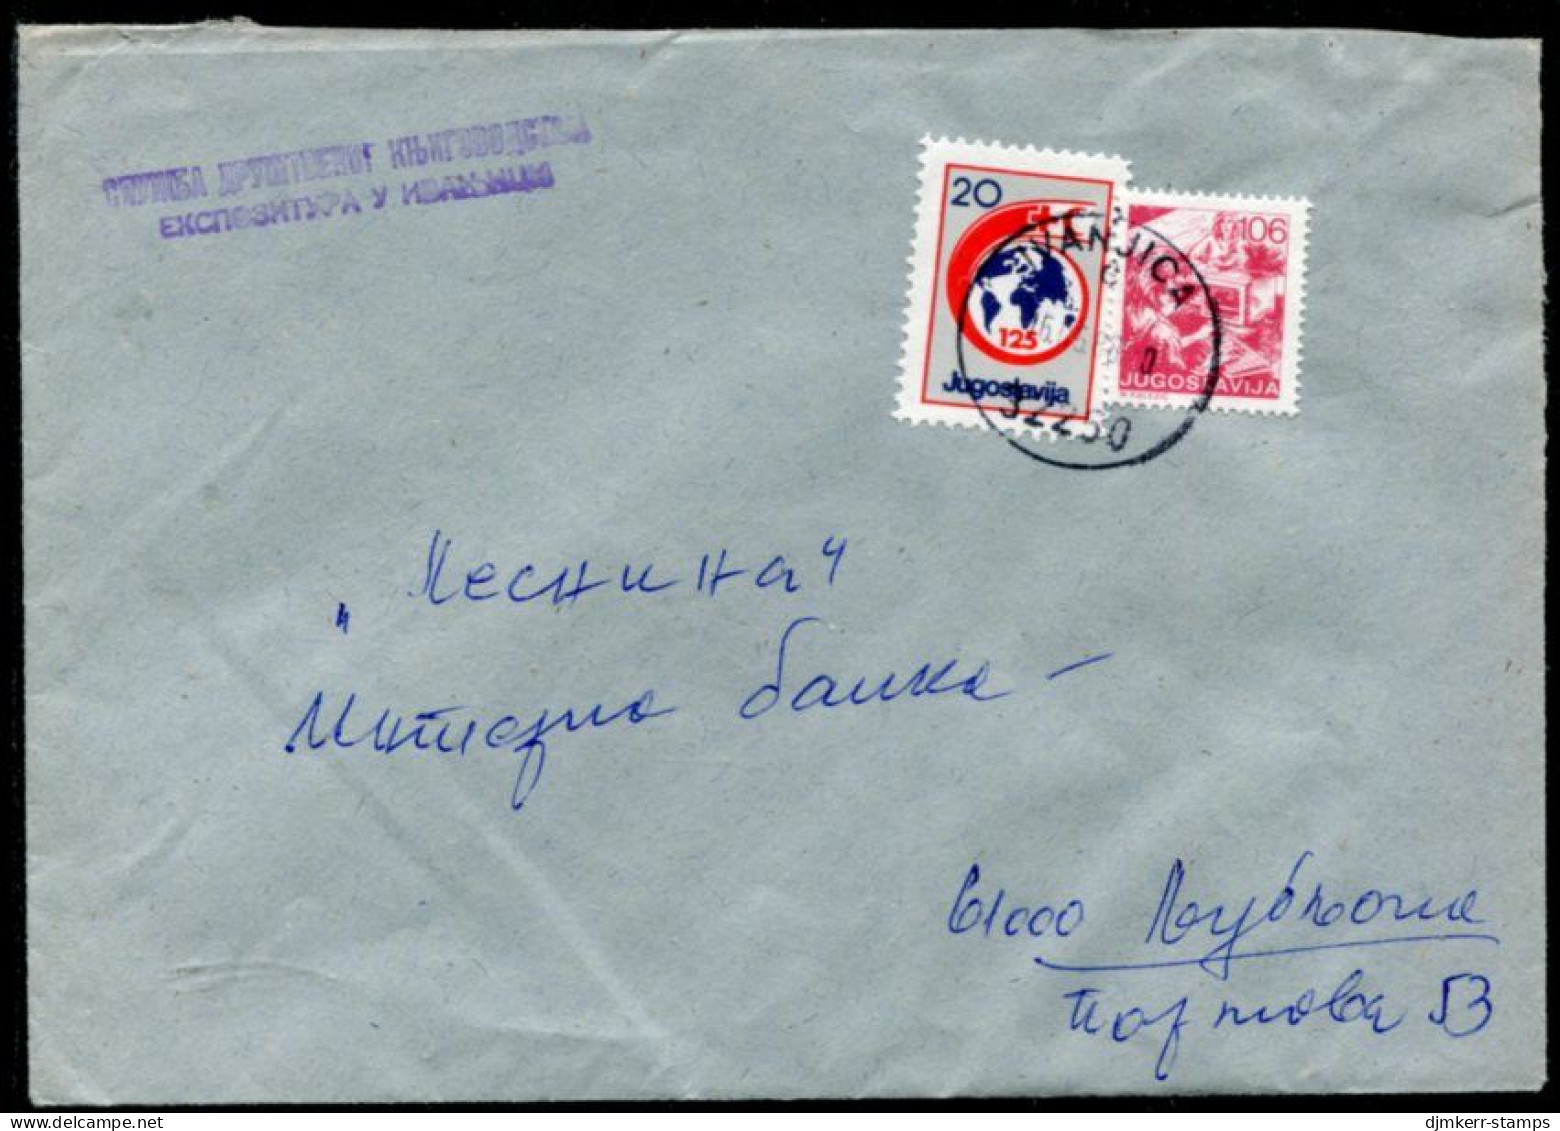 YUGOSLAVIA 1988 Commercial Cover With Red Cross Week 20 D Tax.  Michel ZZM 152 - Wohlfahrtsmarken